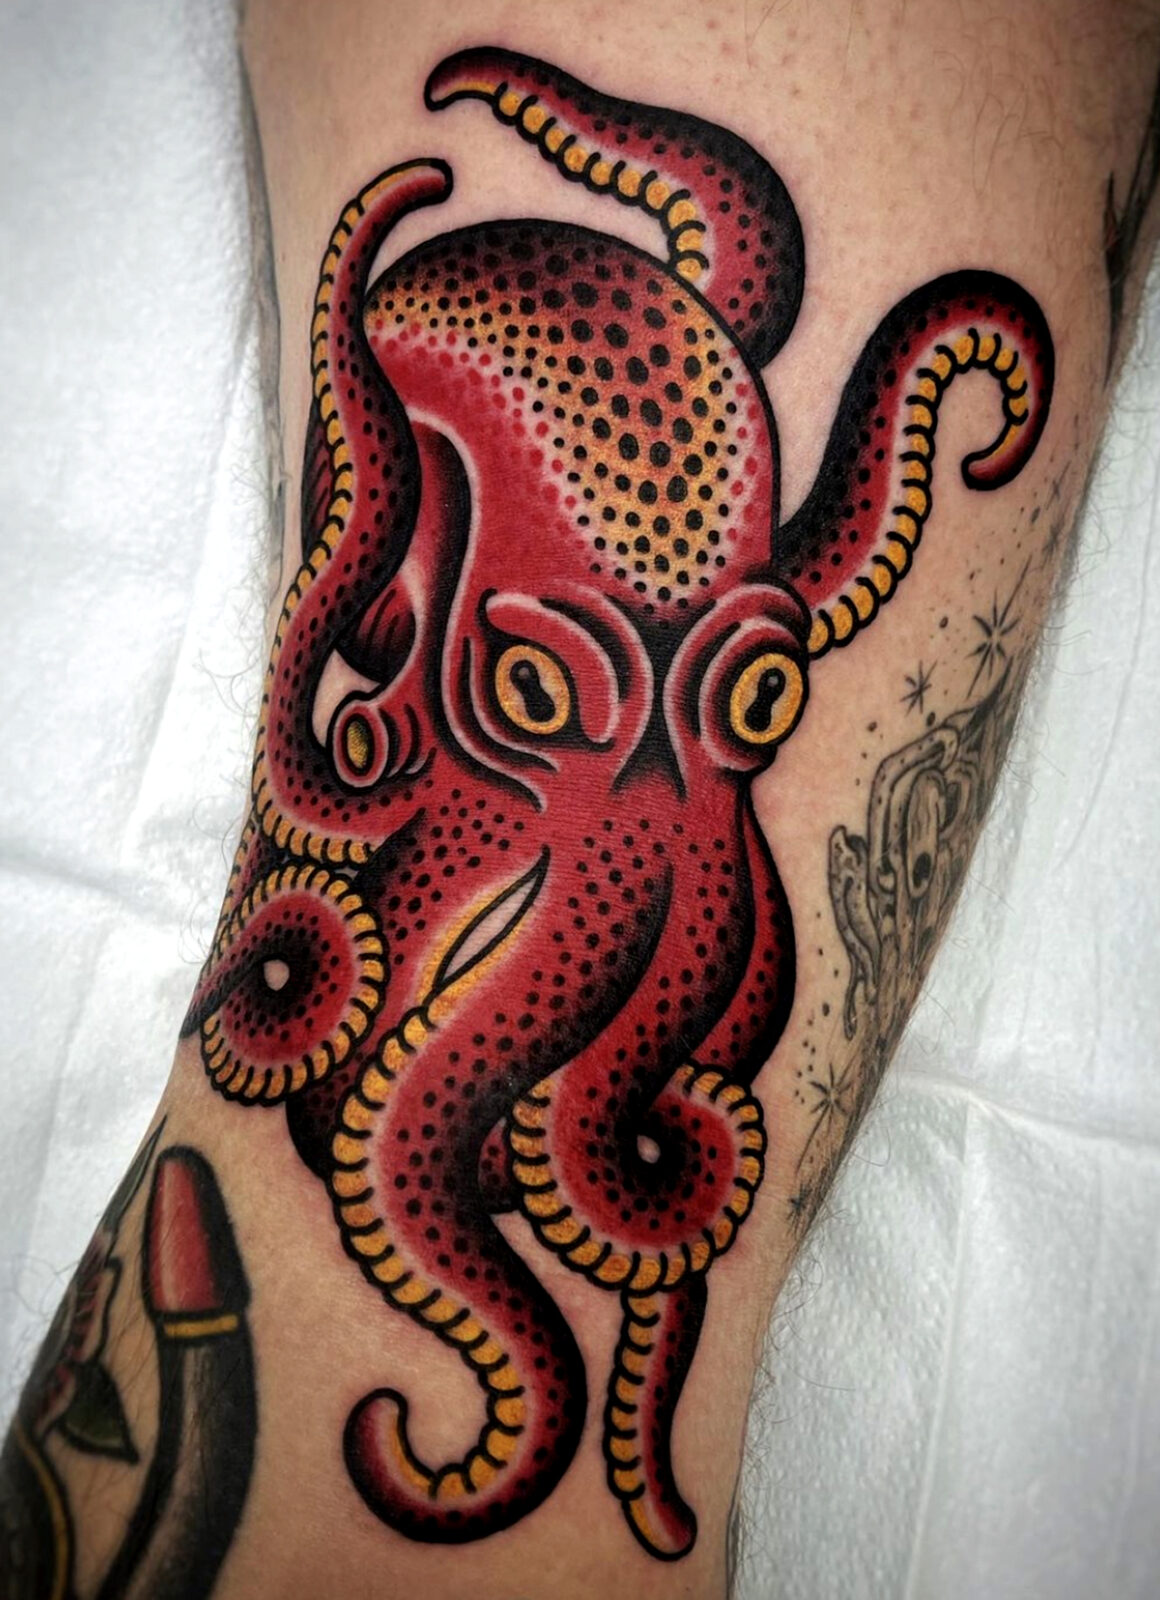 Neotraditional style octopus tattoo done on the chest.